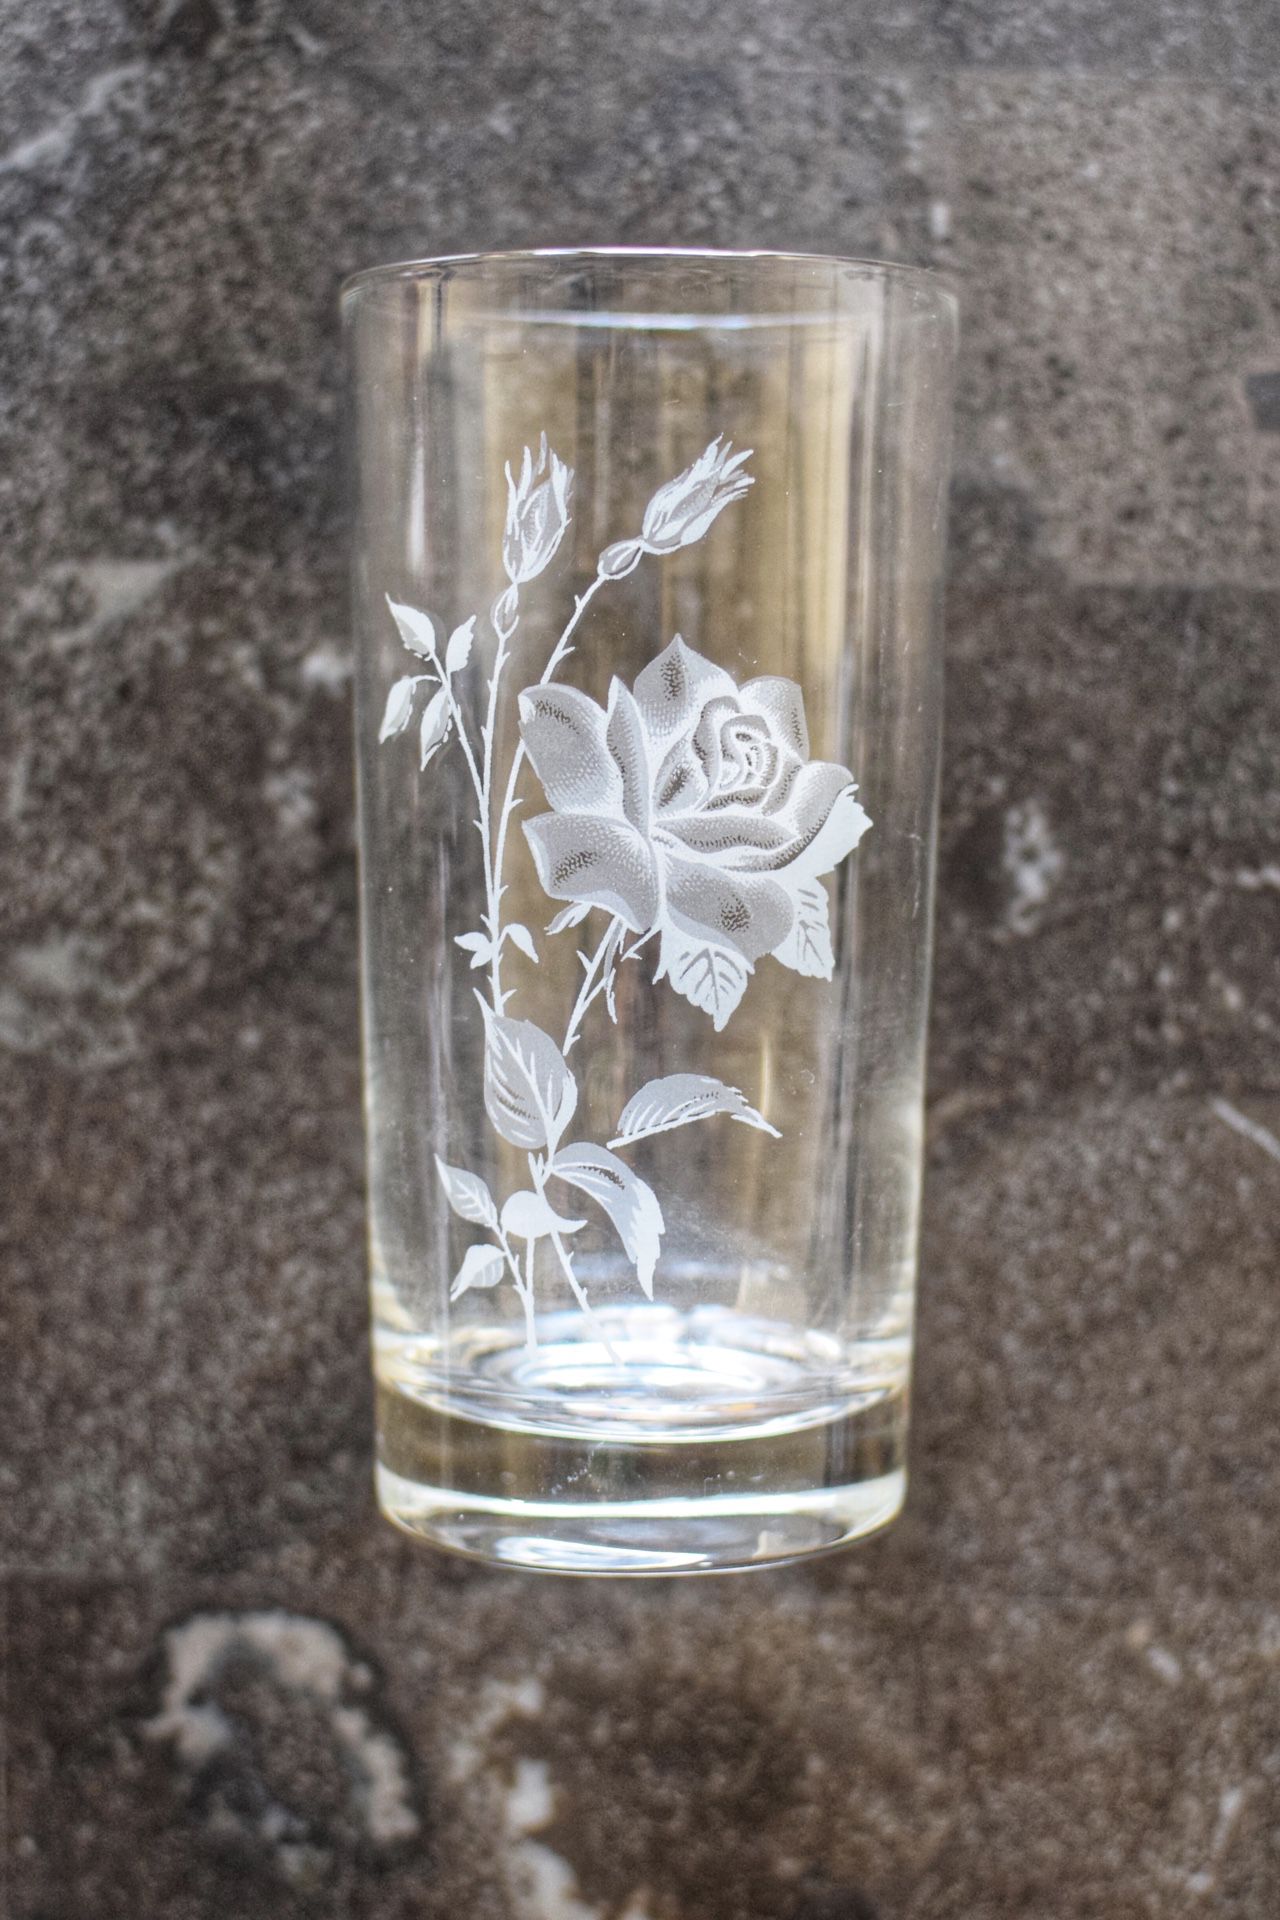 VINTAGE/ANTIQUE DRINKING GLASS SET OF 8 ETCHED WITH ROSES